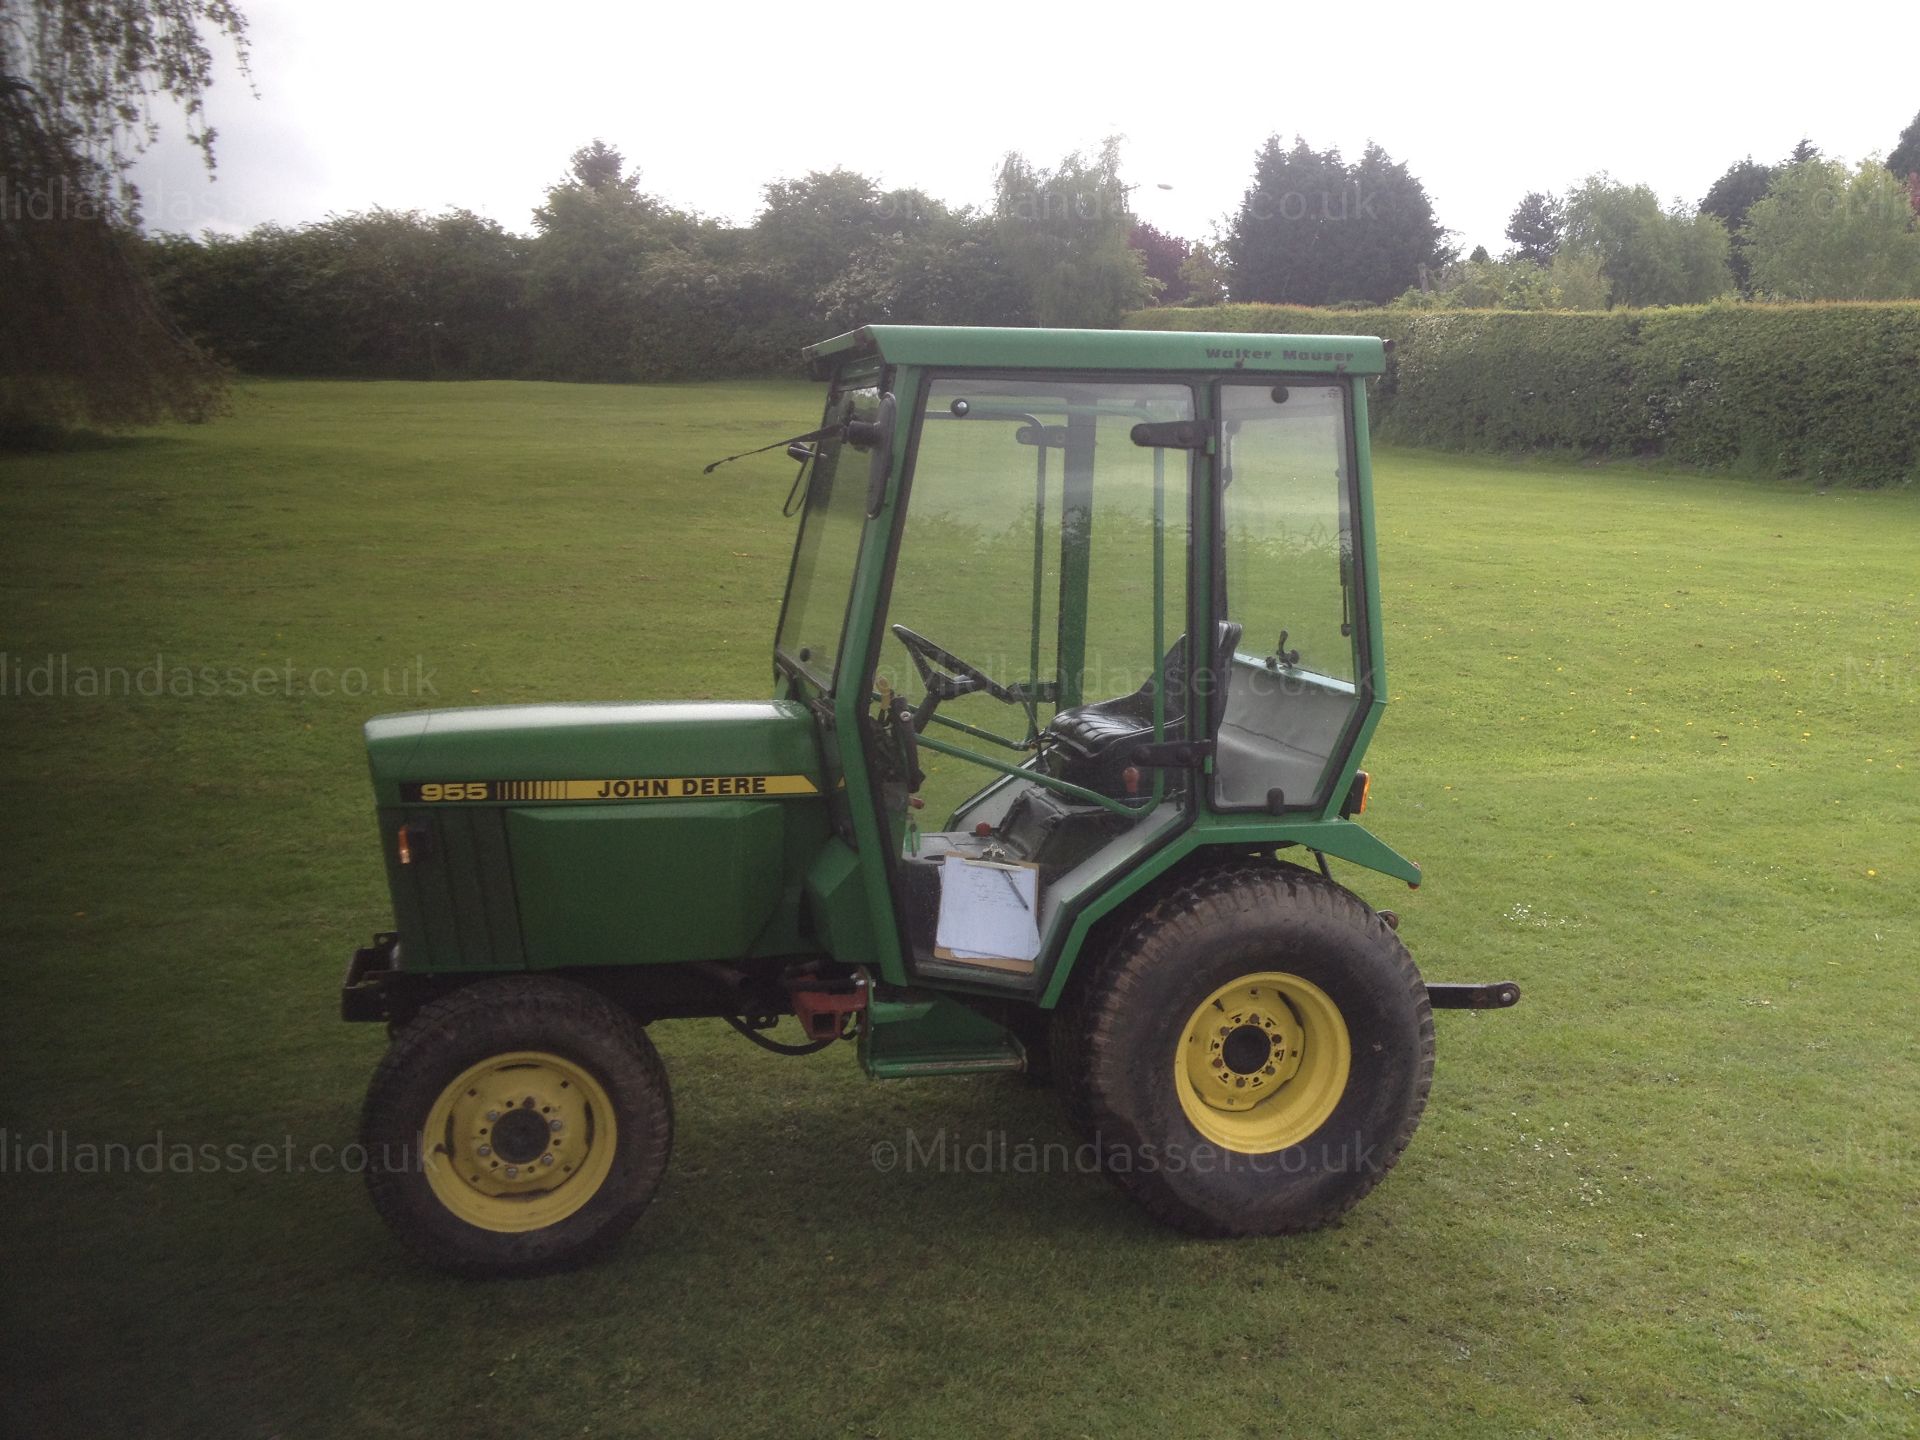 1992 JOHN DEERE 955 COMPACT TRACTOR WITH FULL MAUSER CAB - Image 2 of 7